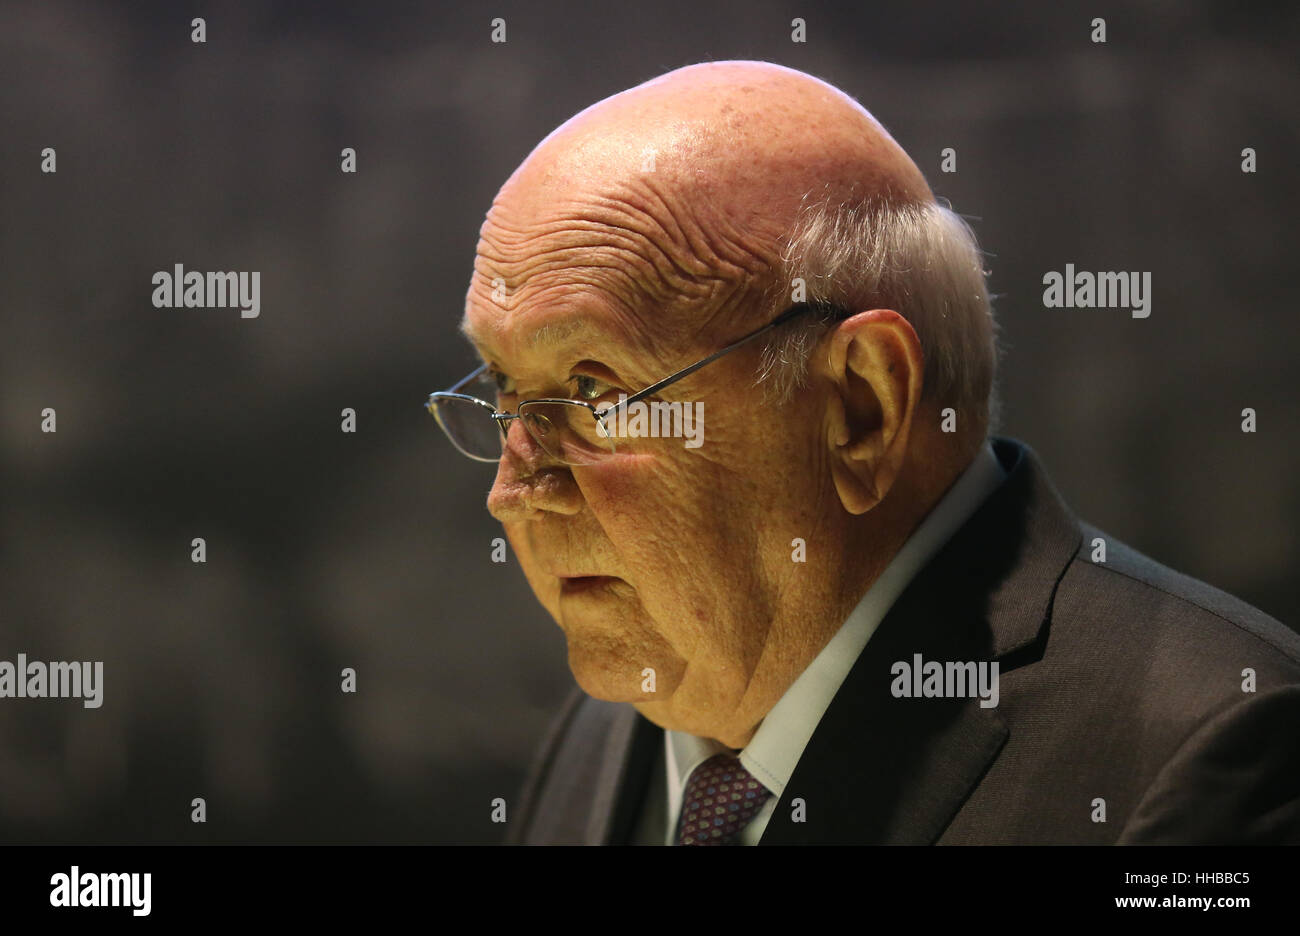 Nobel Peace Prize winner FW de Klerk addresses the Trinity College Law Society after he was presented with the Praeses Elit Award as a recognition of his key role in ending apartheid and his outstanding contribution to reconciliation in South Africa. Stock Photo